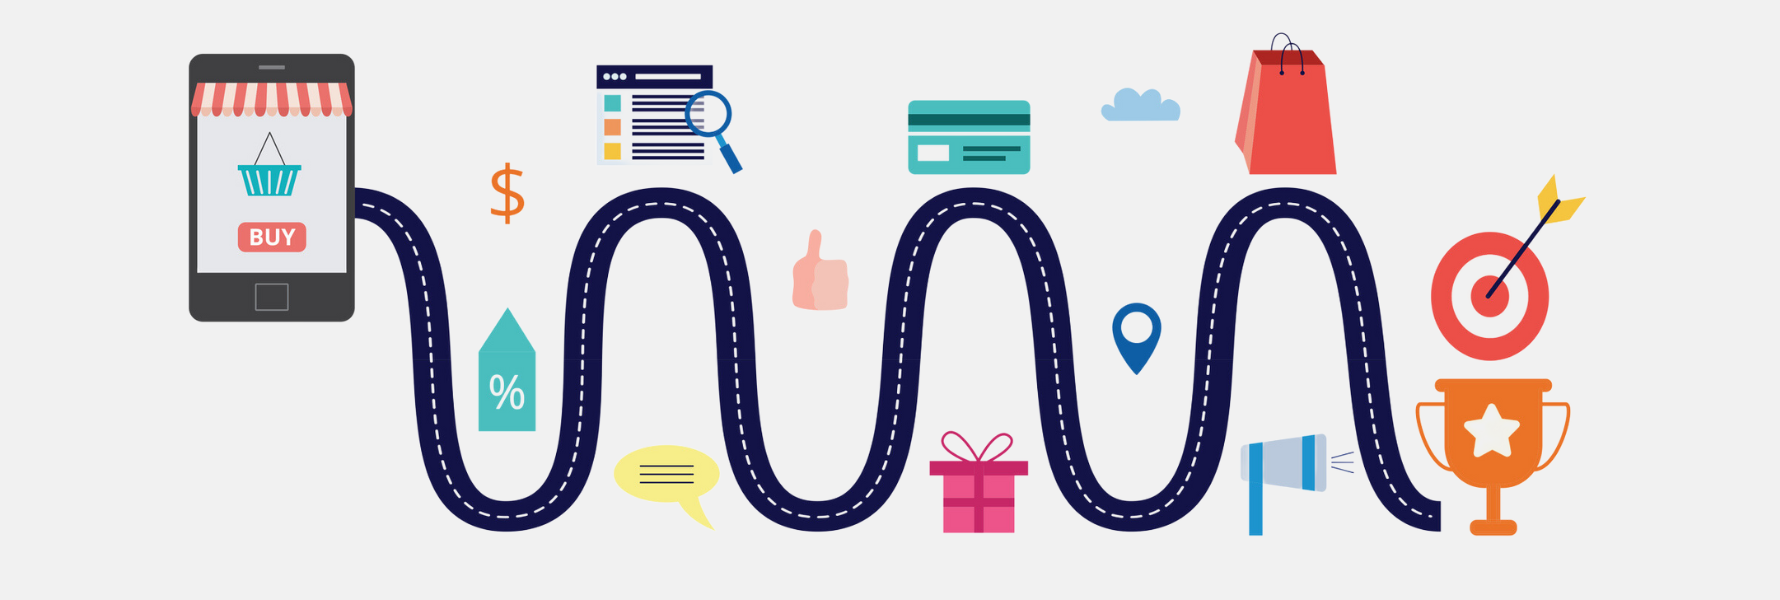 ECOM 101: Building Customer Journey Maps for Your Ecommerce Site